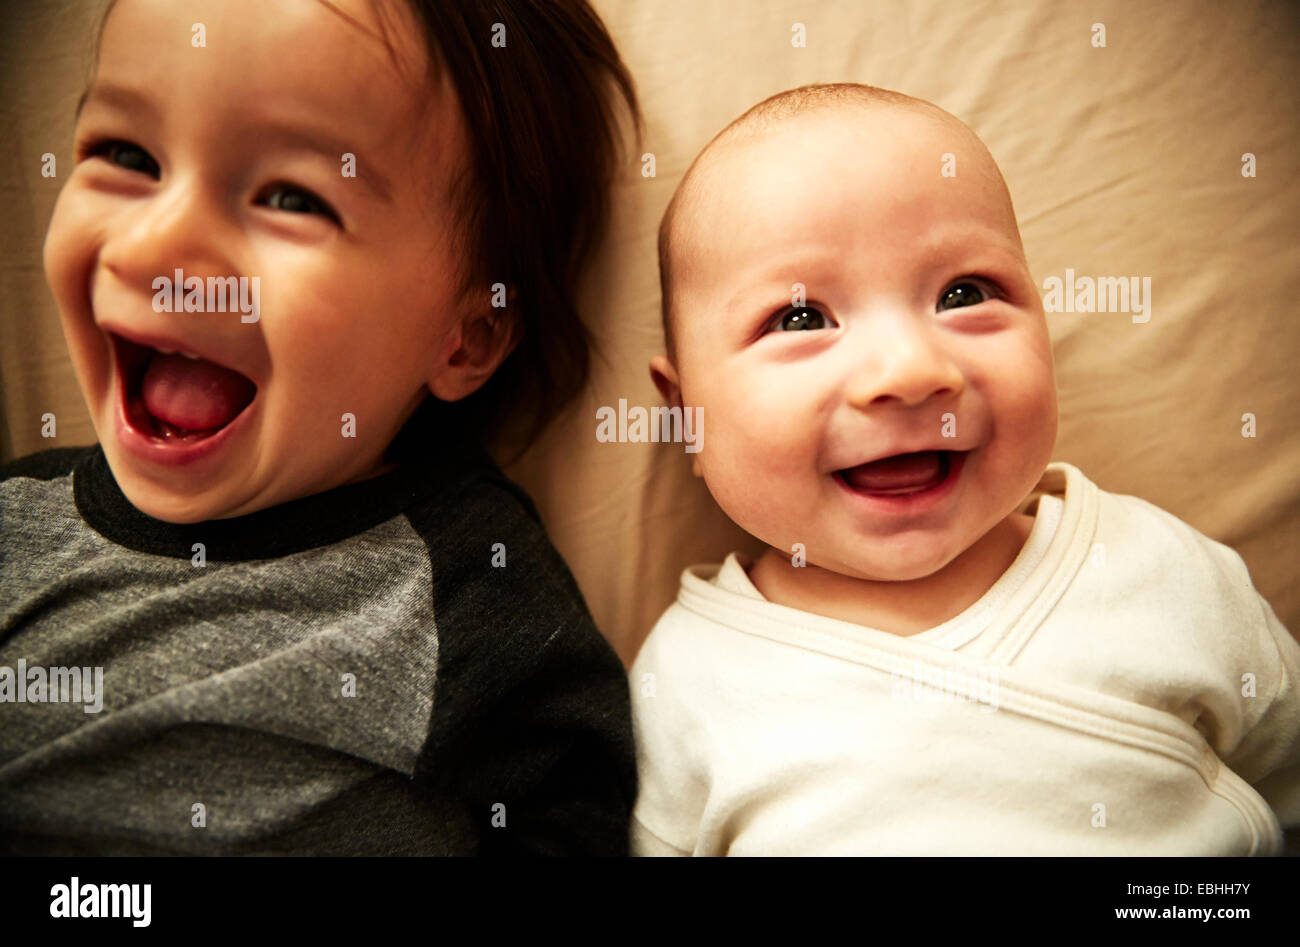 Overhead view of male toddler and baby brother laughing Stock Photo